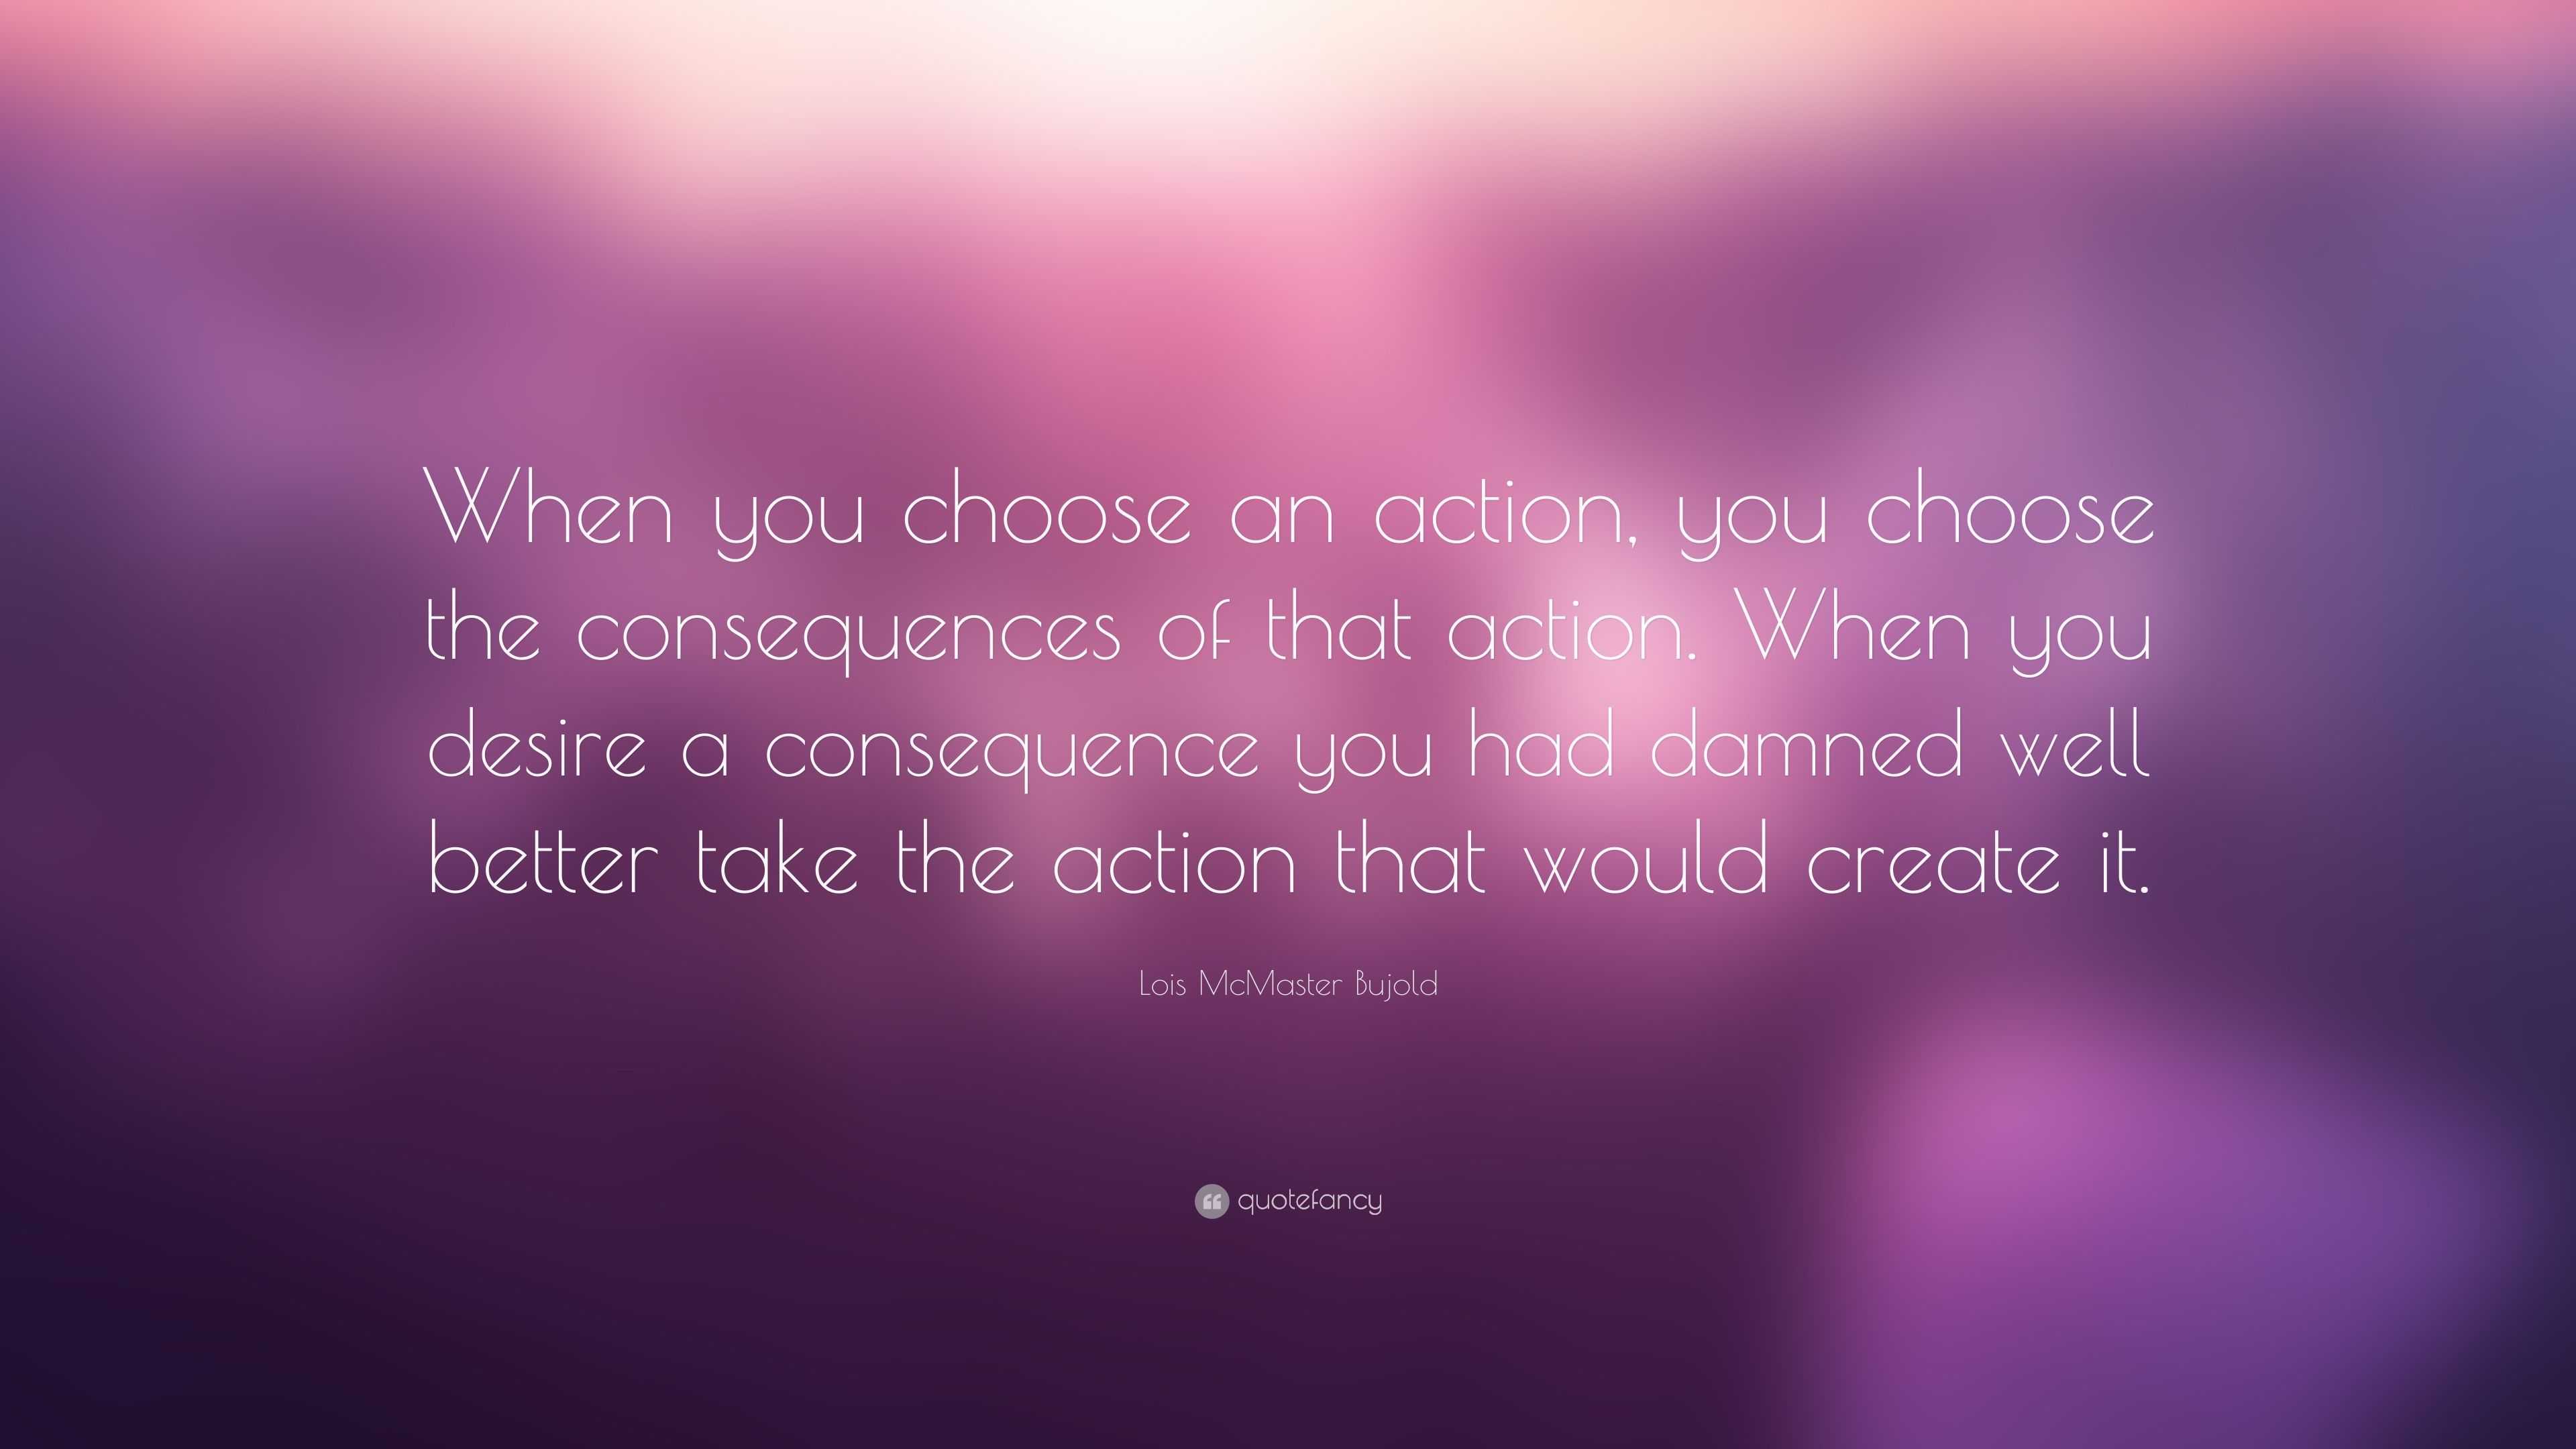 Lois McMaster Bujold Quote: “When you choose an action, you choose the ...